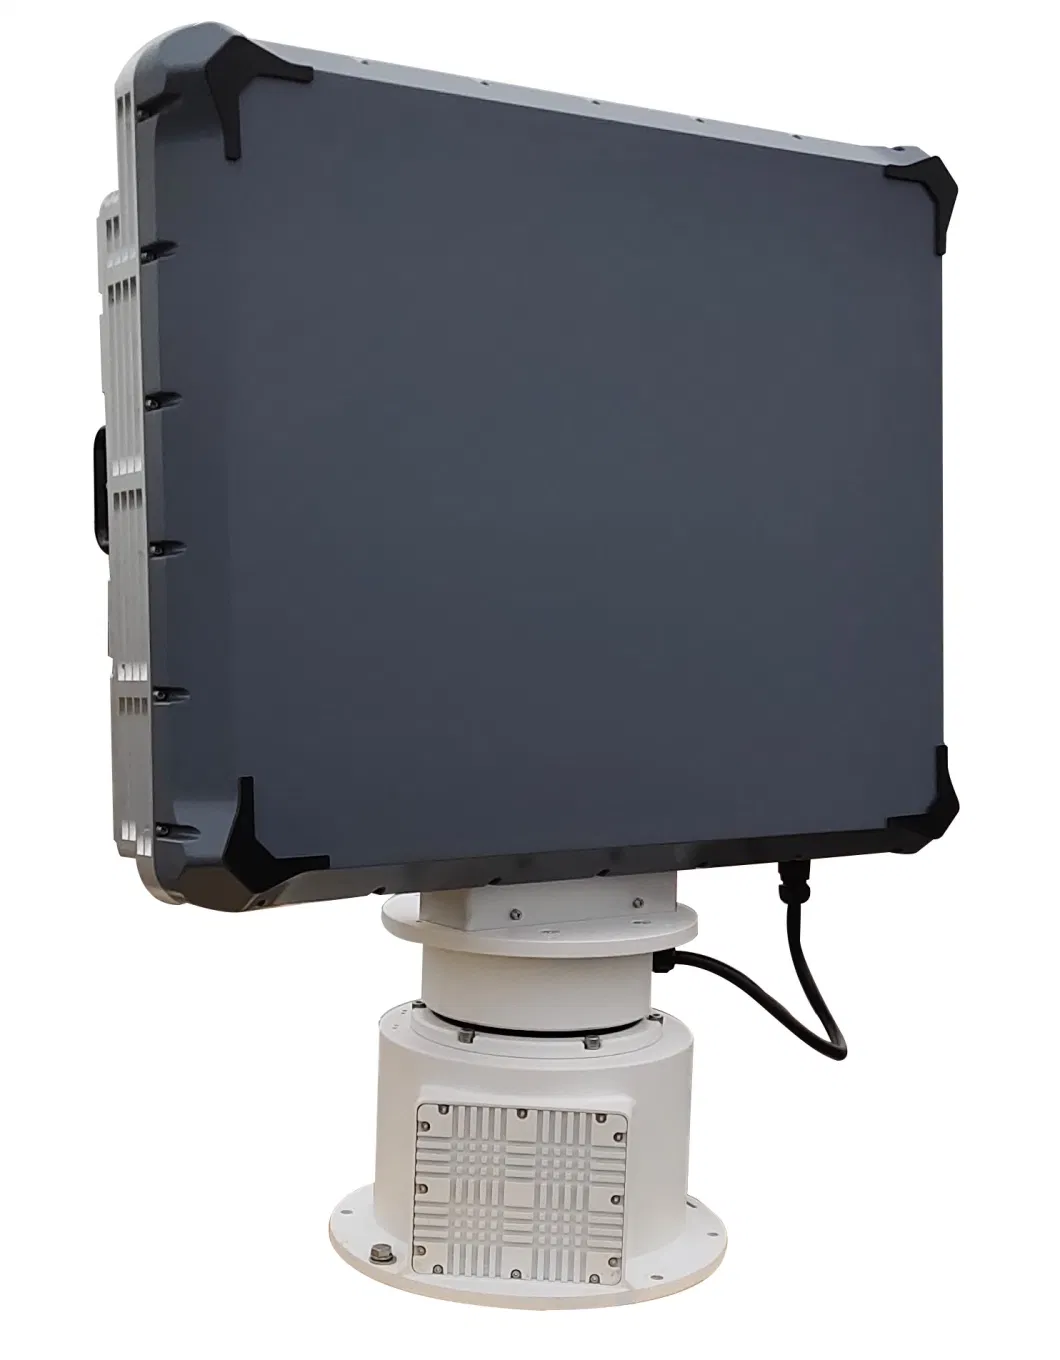 High-Resolution Fast-Scan Surveillance Radar to Provide Outstanding Detection and Tracking Performance for Unregulated Border Surveillance Systems